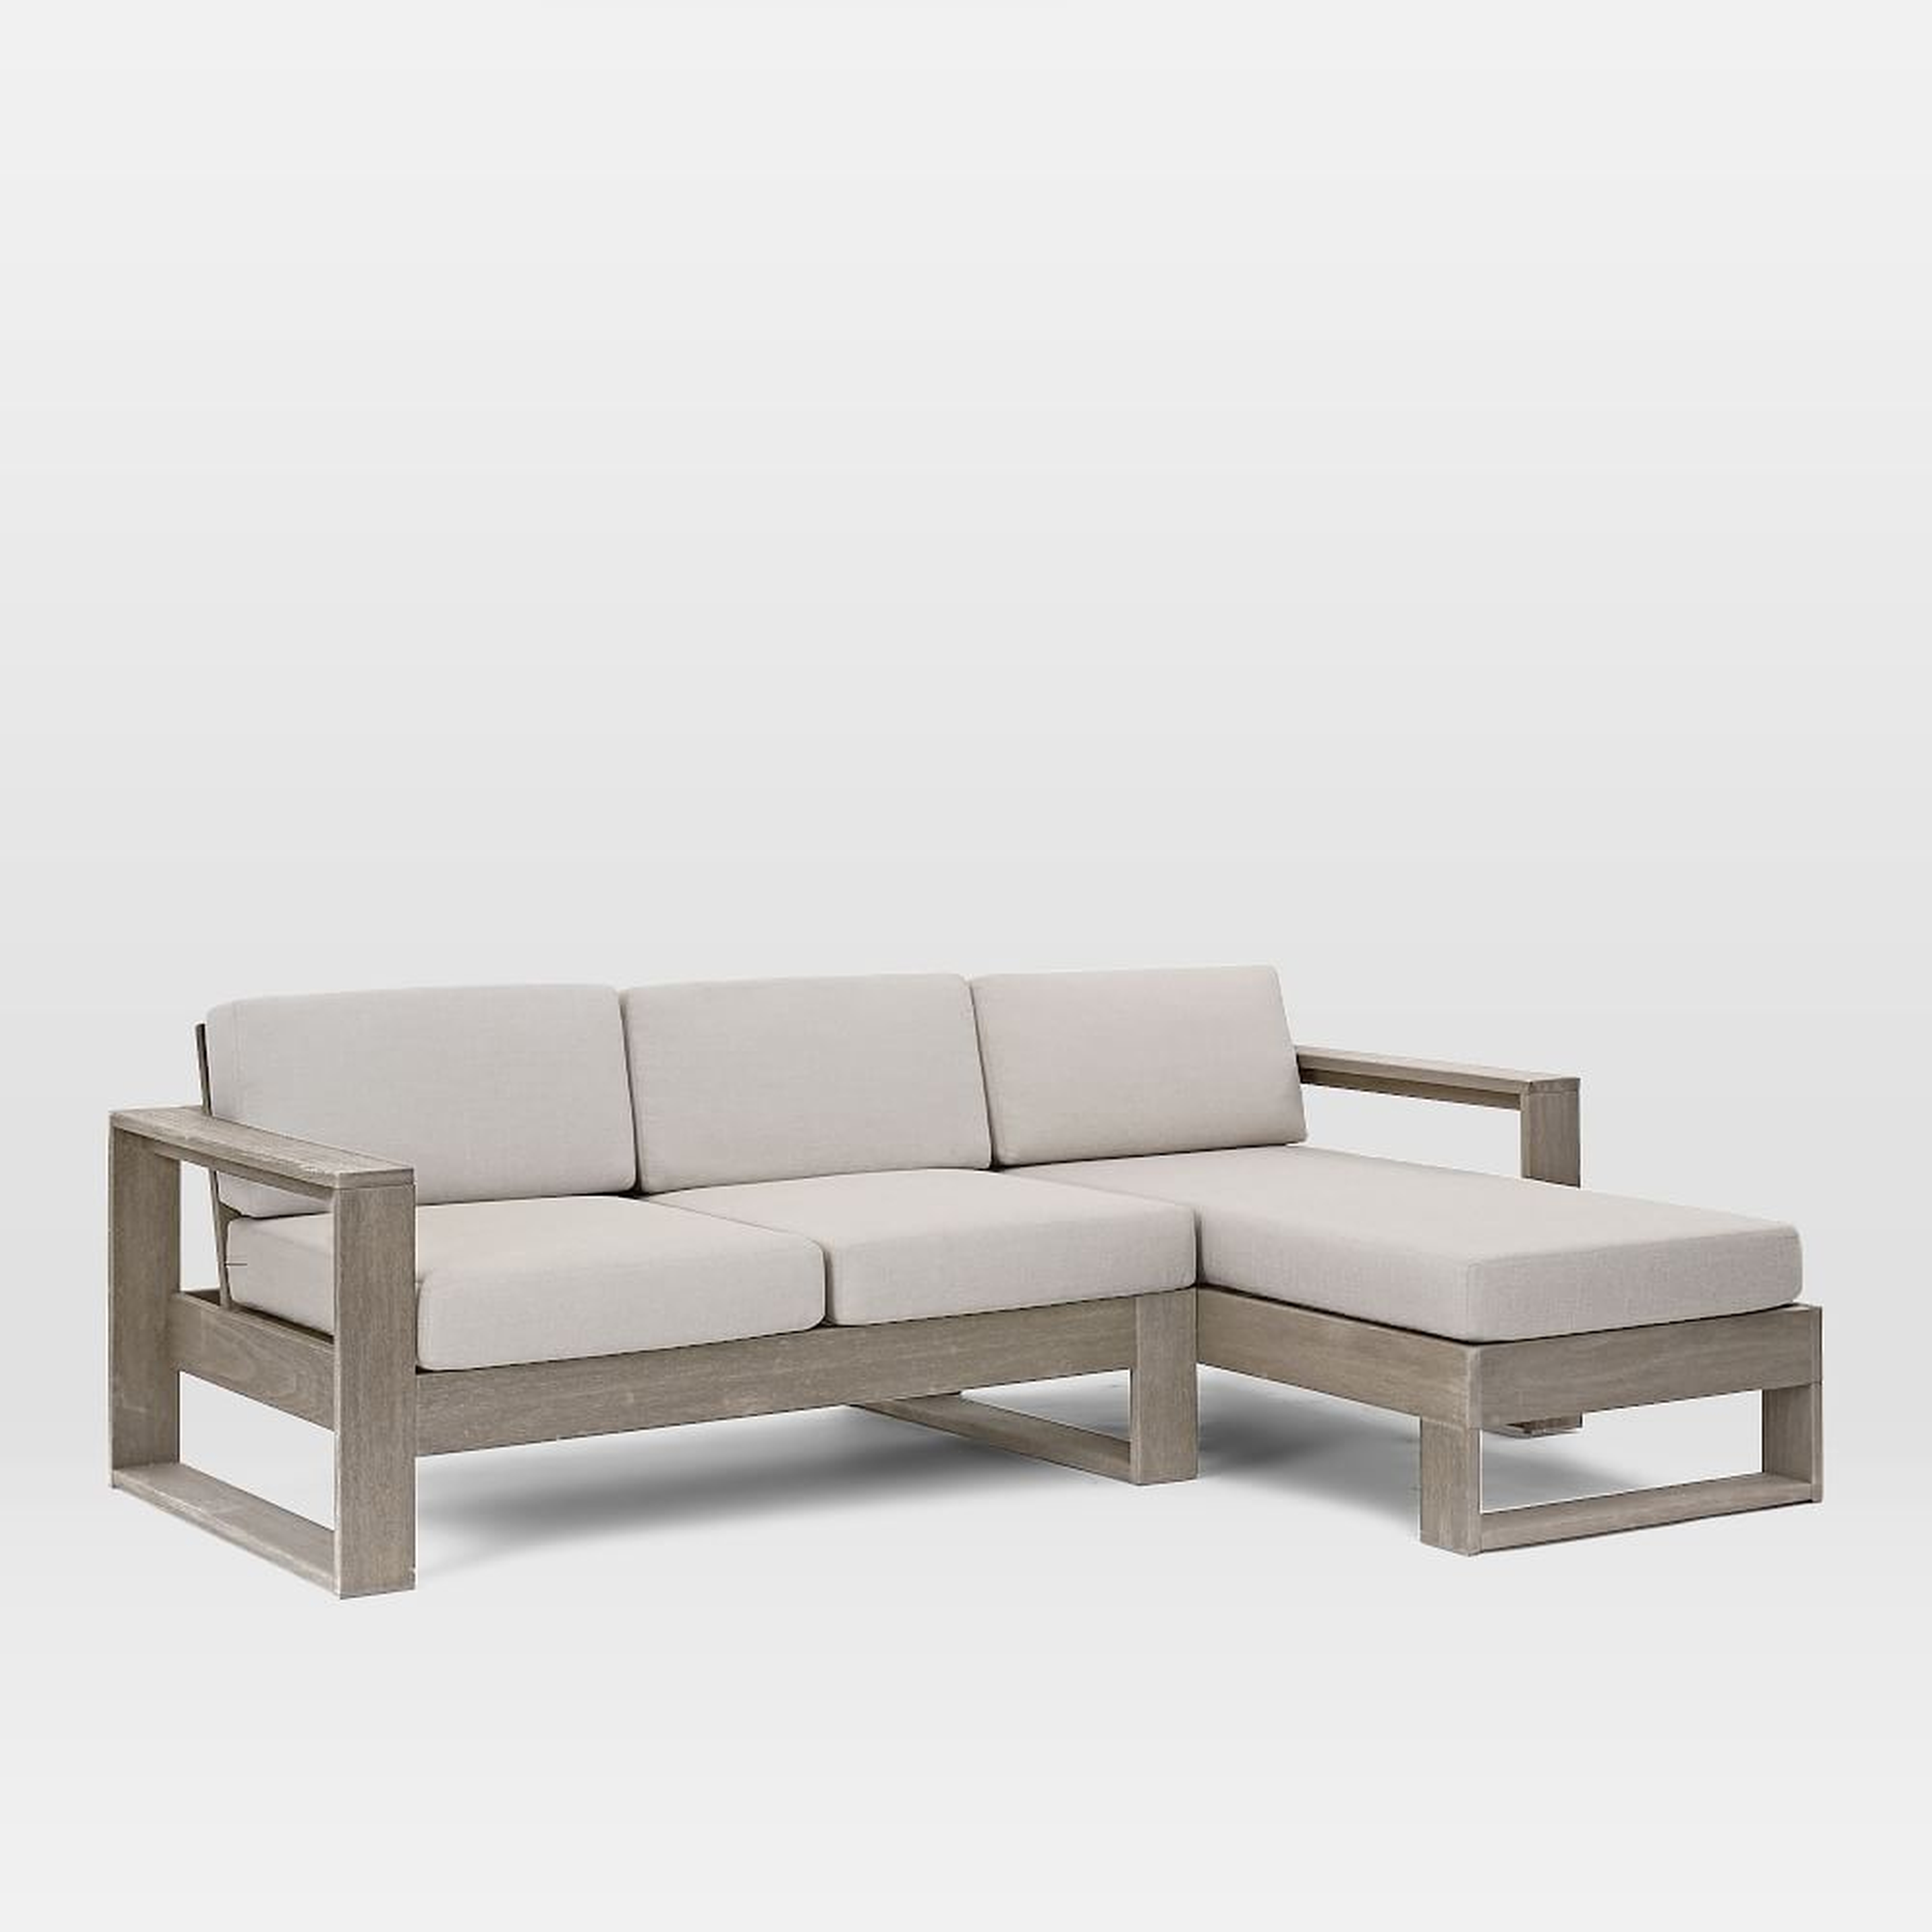 Portside Set 1: Weathered Gray Left Arm Sofa + Right Arm Chaise - West Elm